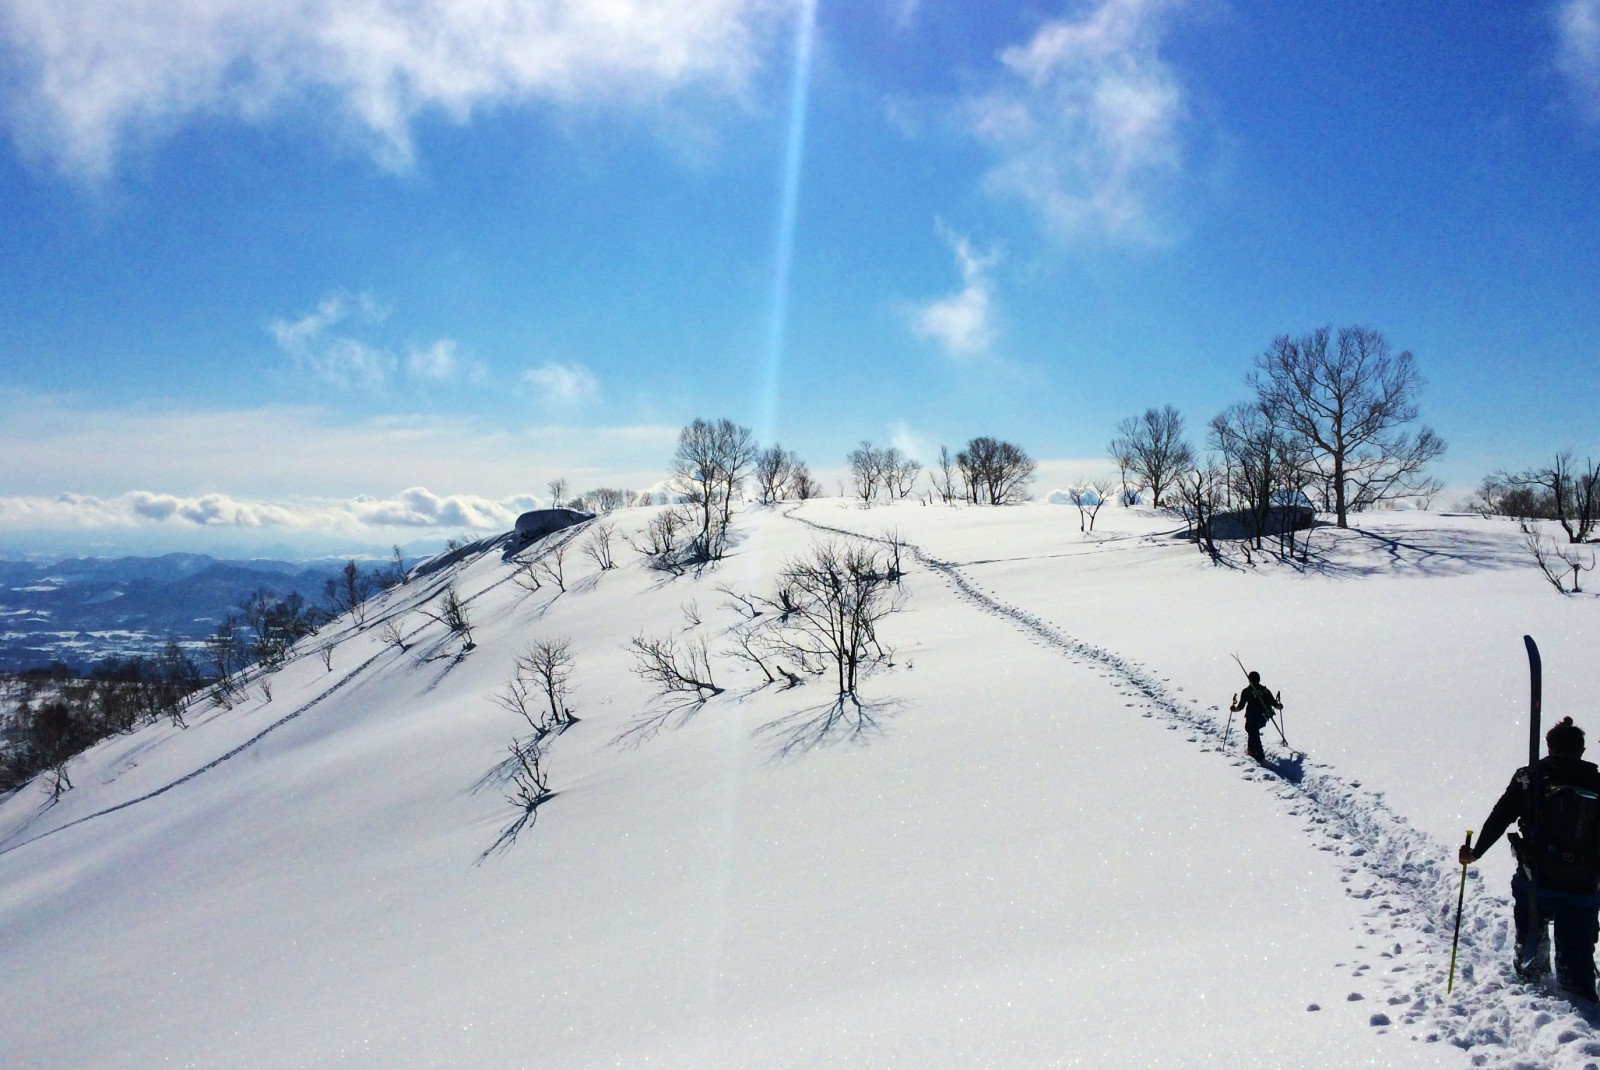 People hiking with skis on snow-covered mountain during daytime